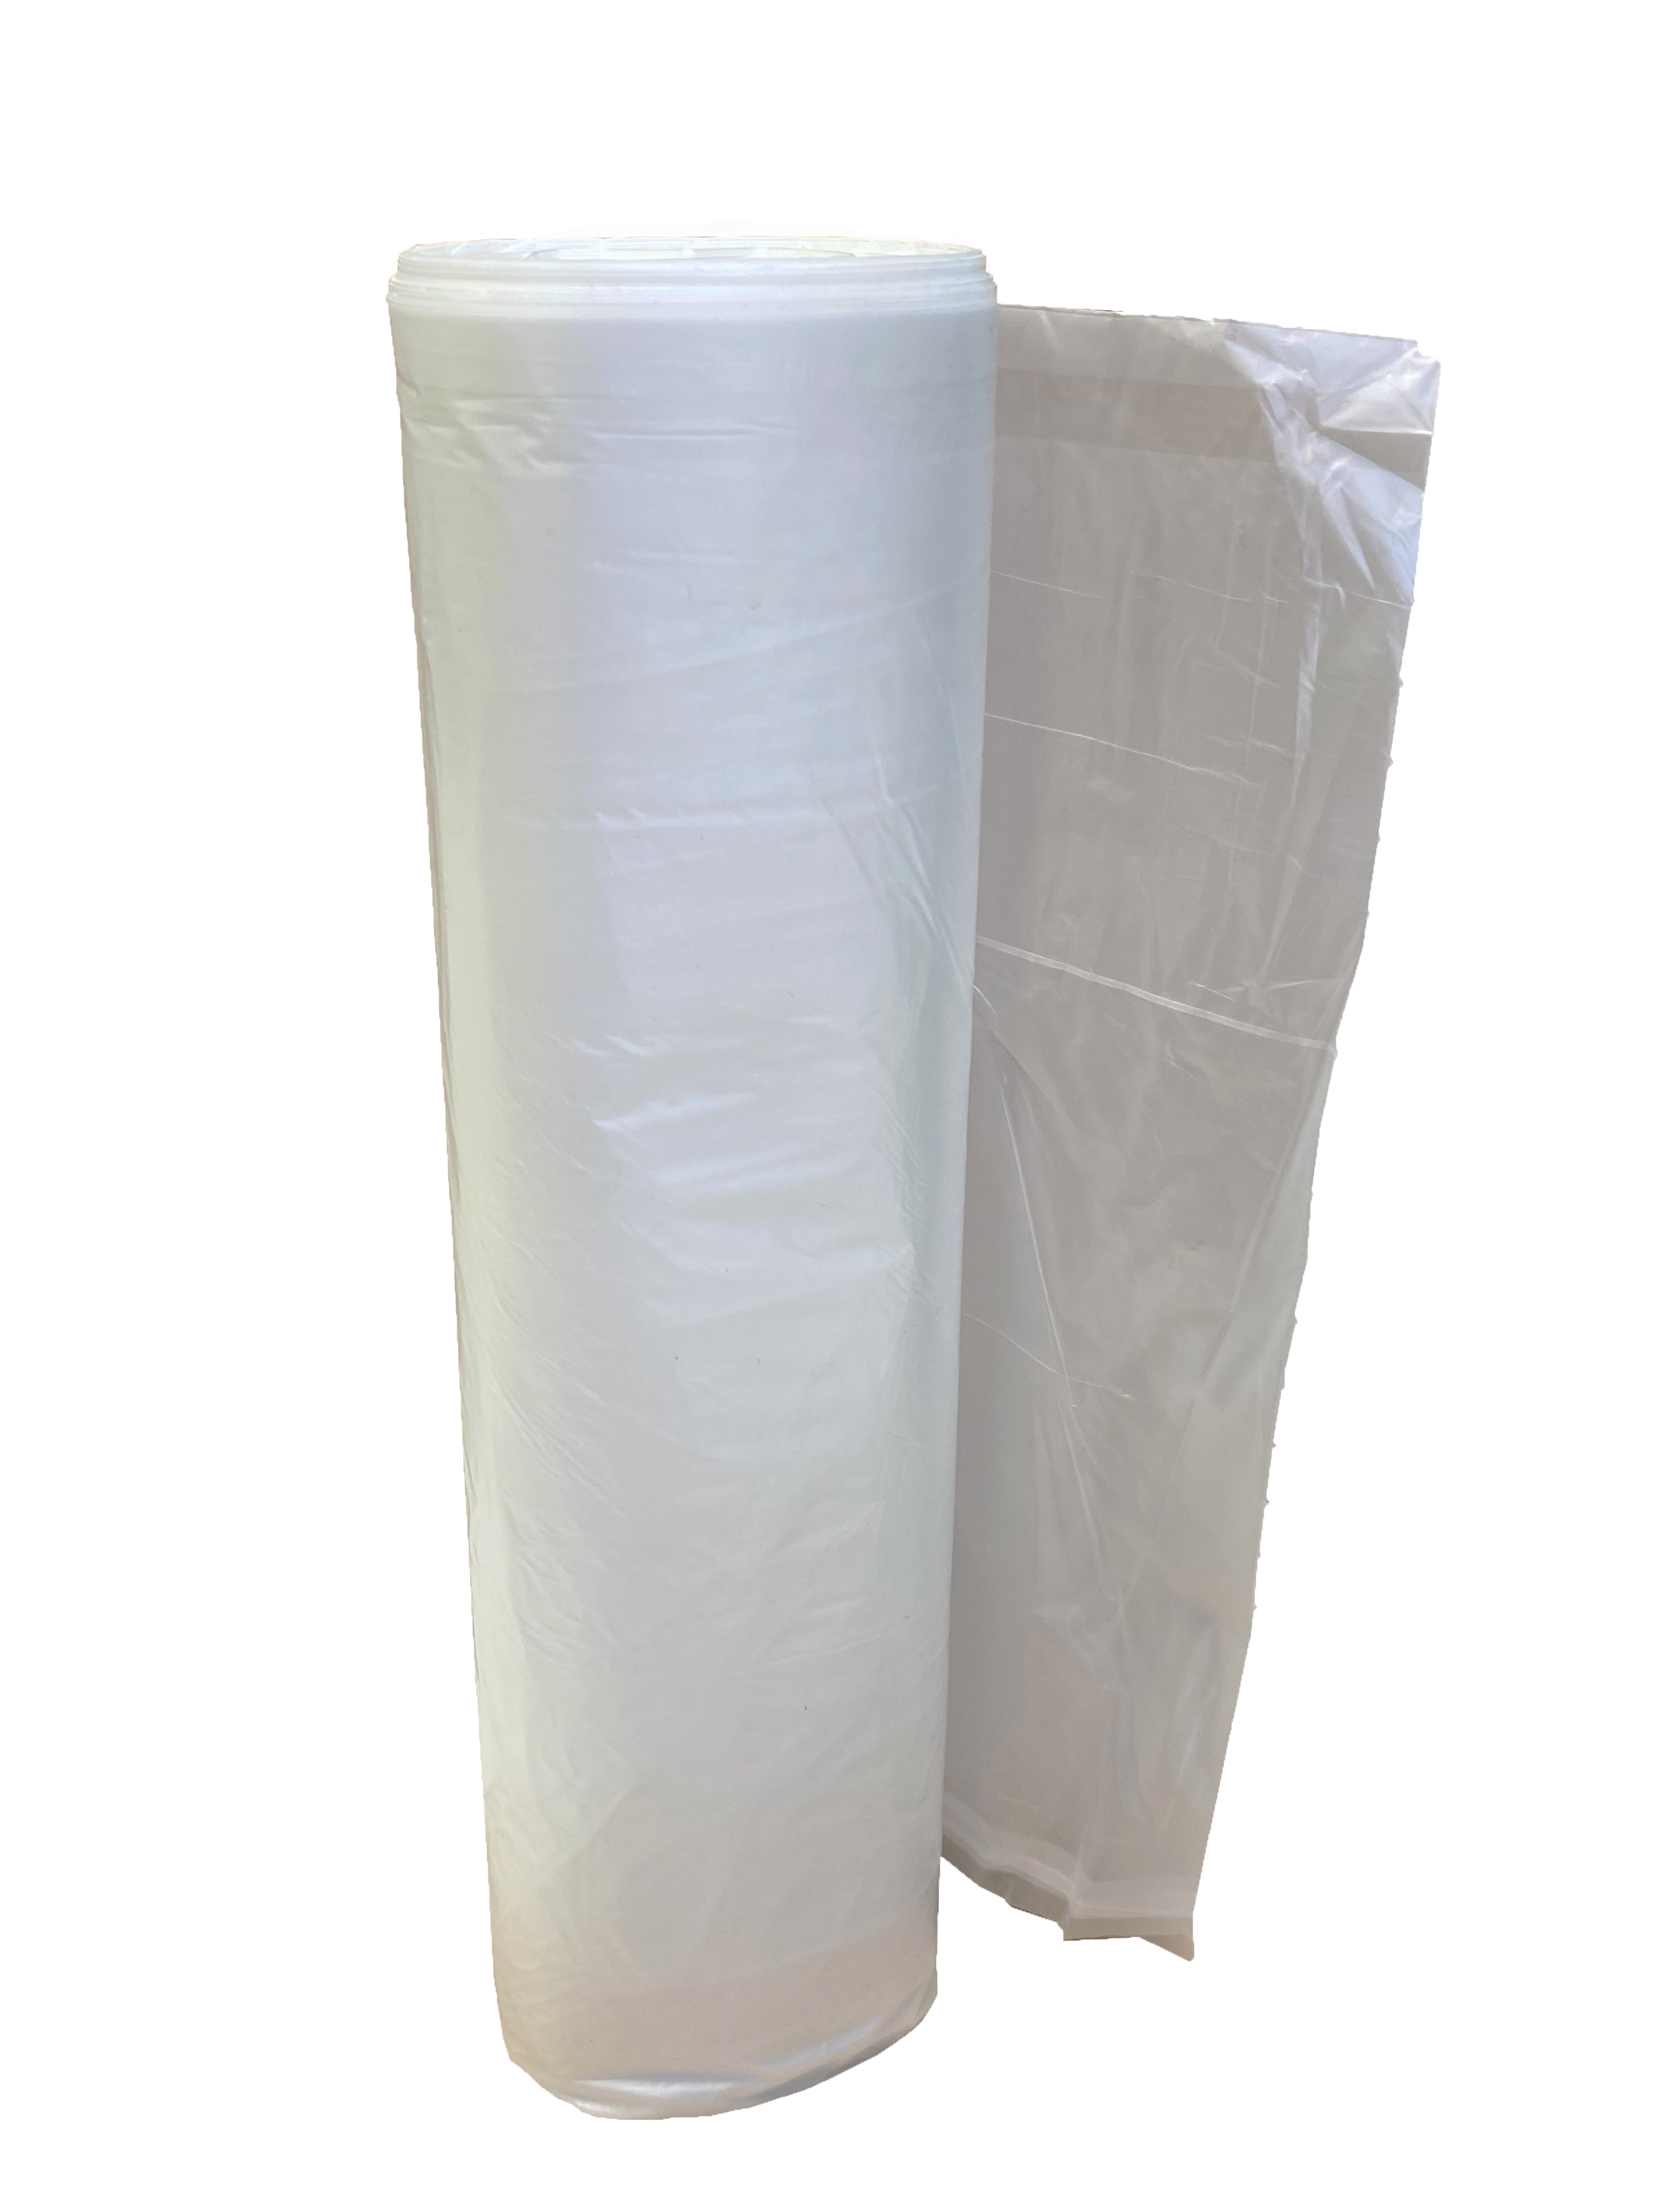 10 GALLON Clear Office Trash Liners 1000/cs - MADOOV Cleaning